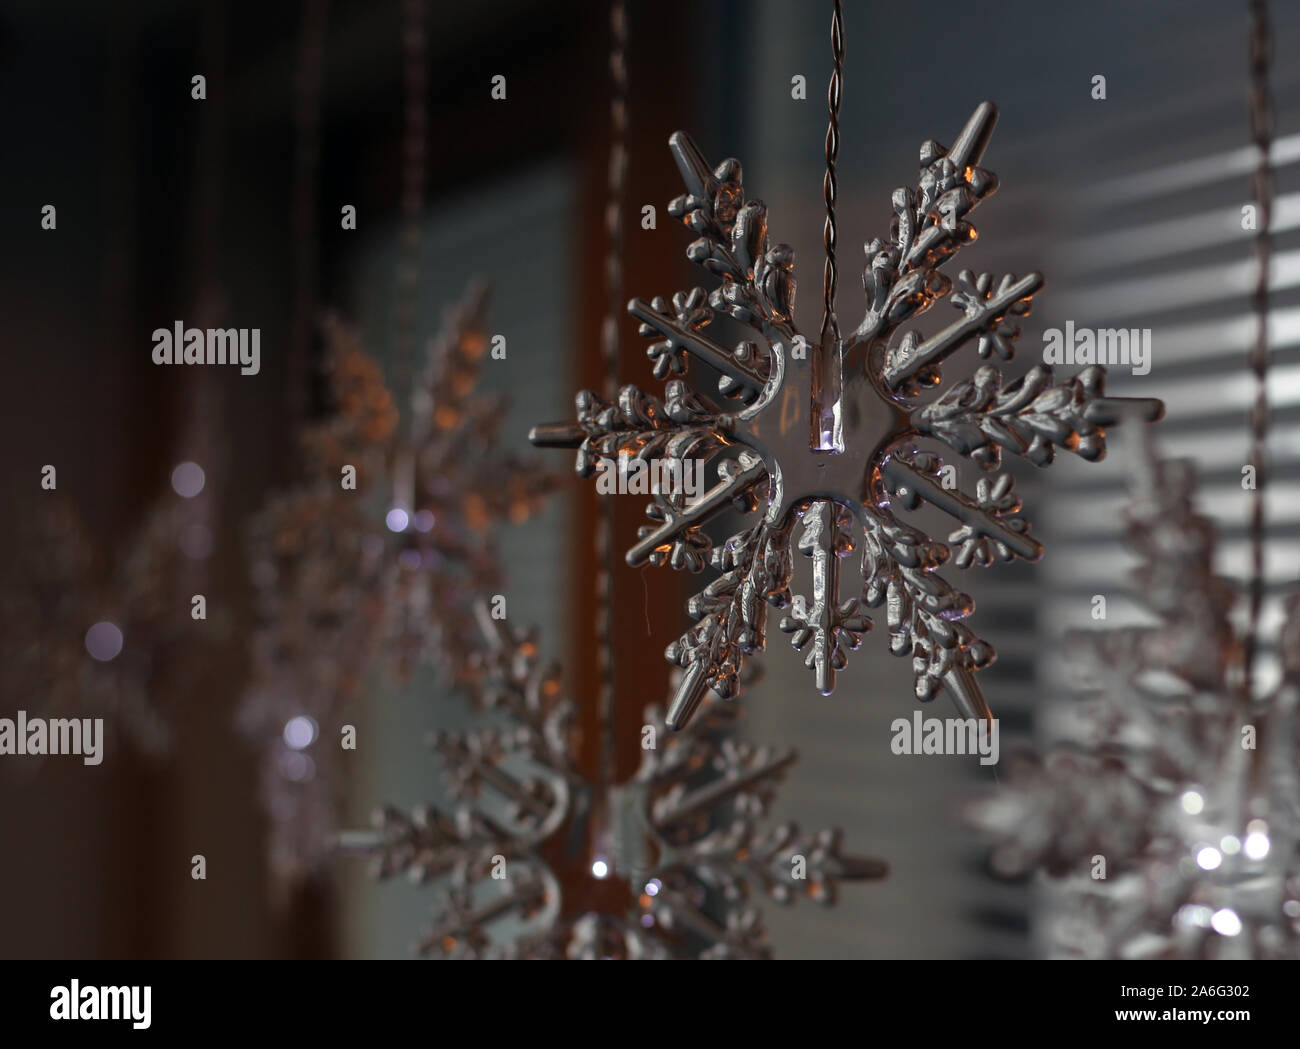 Snowflake shaped Christmas lights hanging in front of a window indoors. Lovely piece of winter / holiday season themed home decoration. Stock Photo